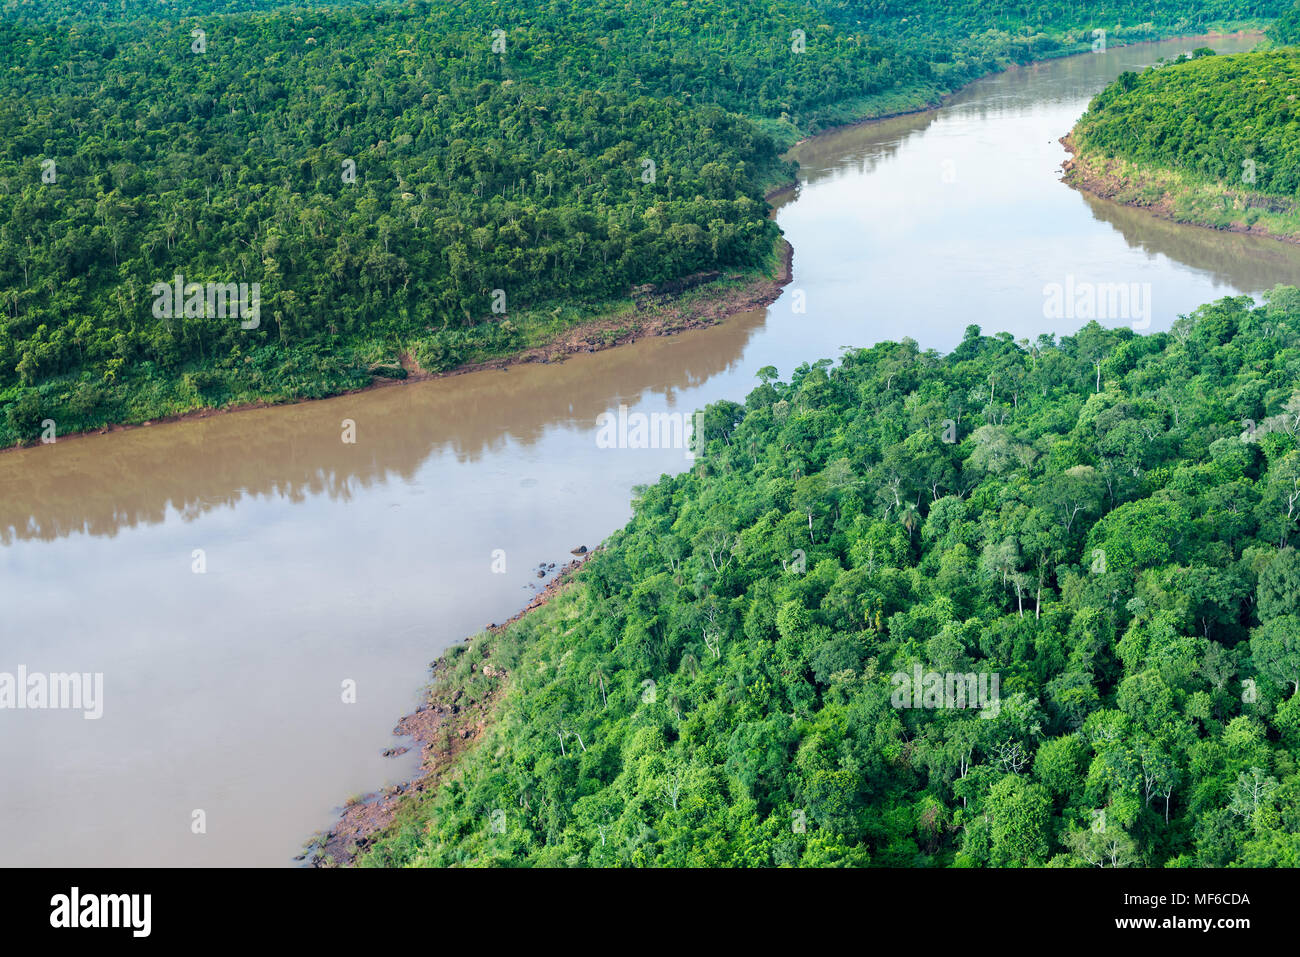 Aerial view of the Iguazu River on the border of Brazil and Argentina Stock Photo